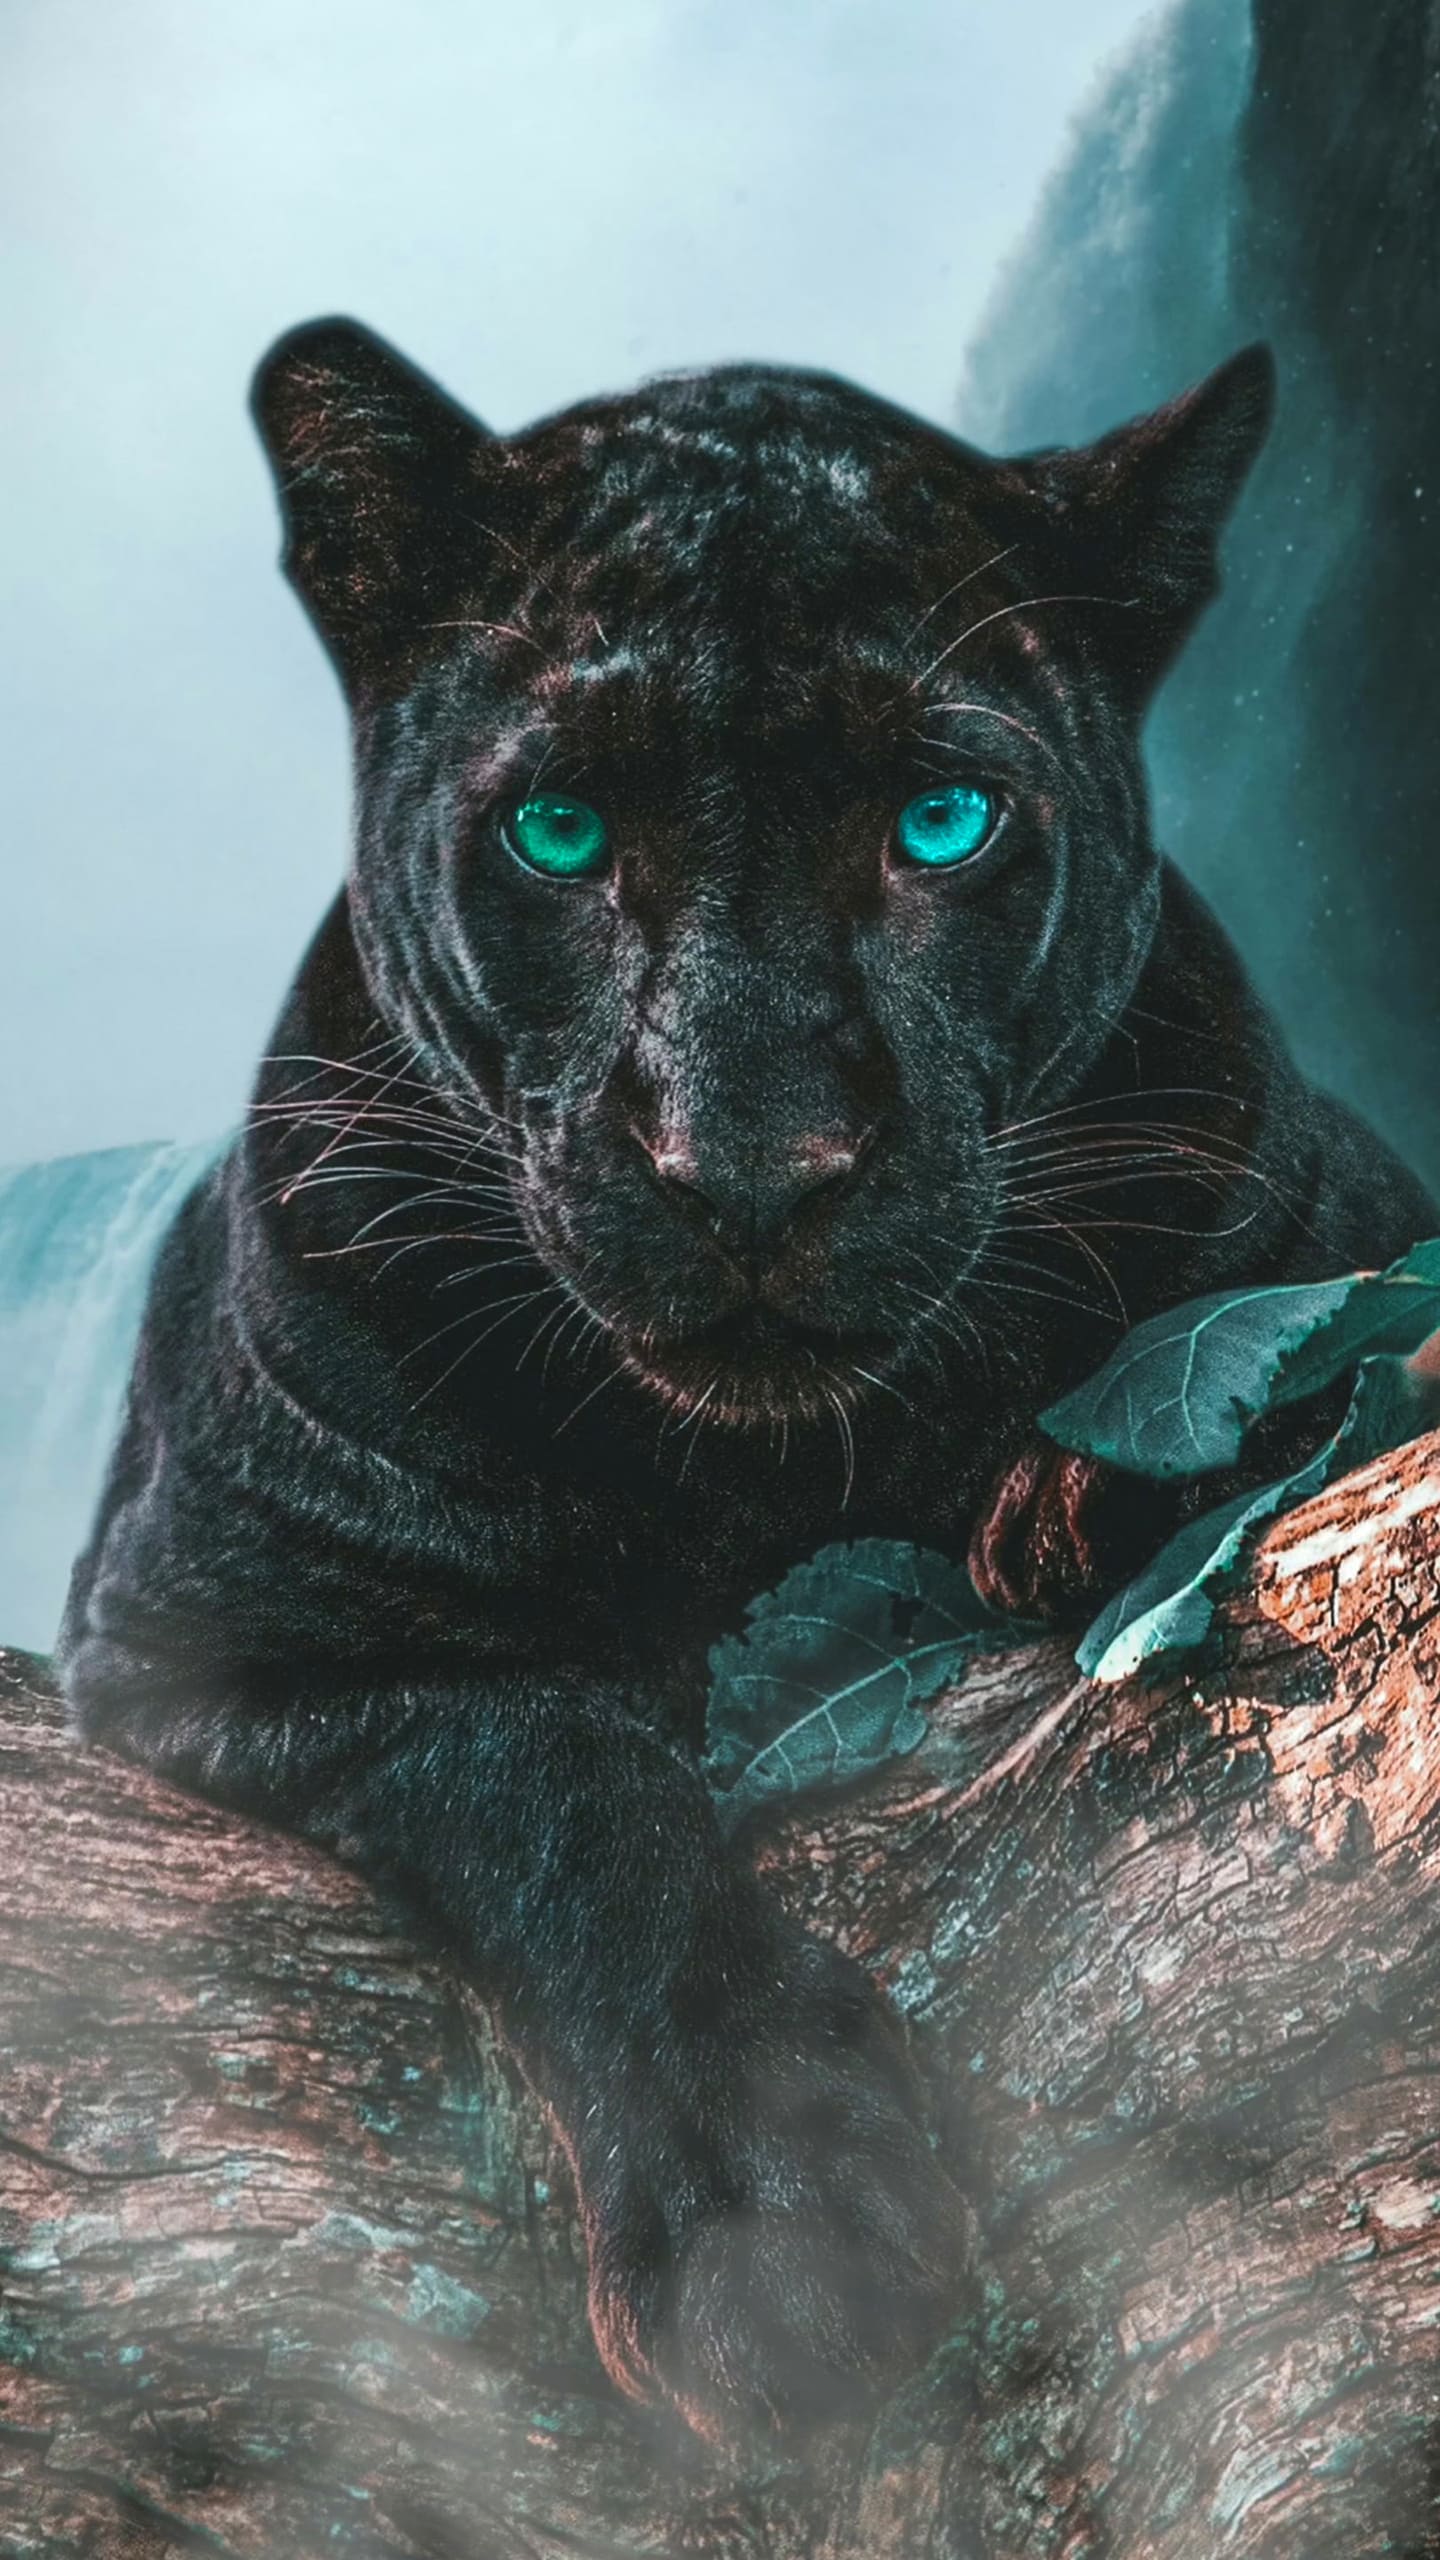 Panther Wallpapers